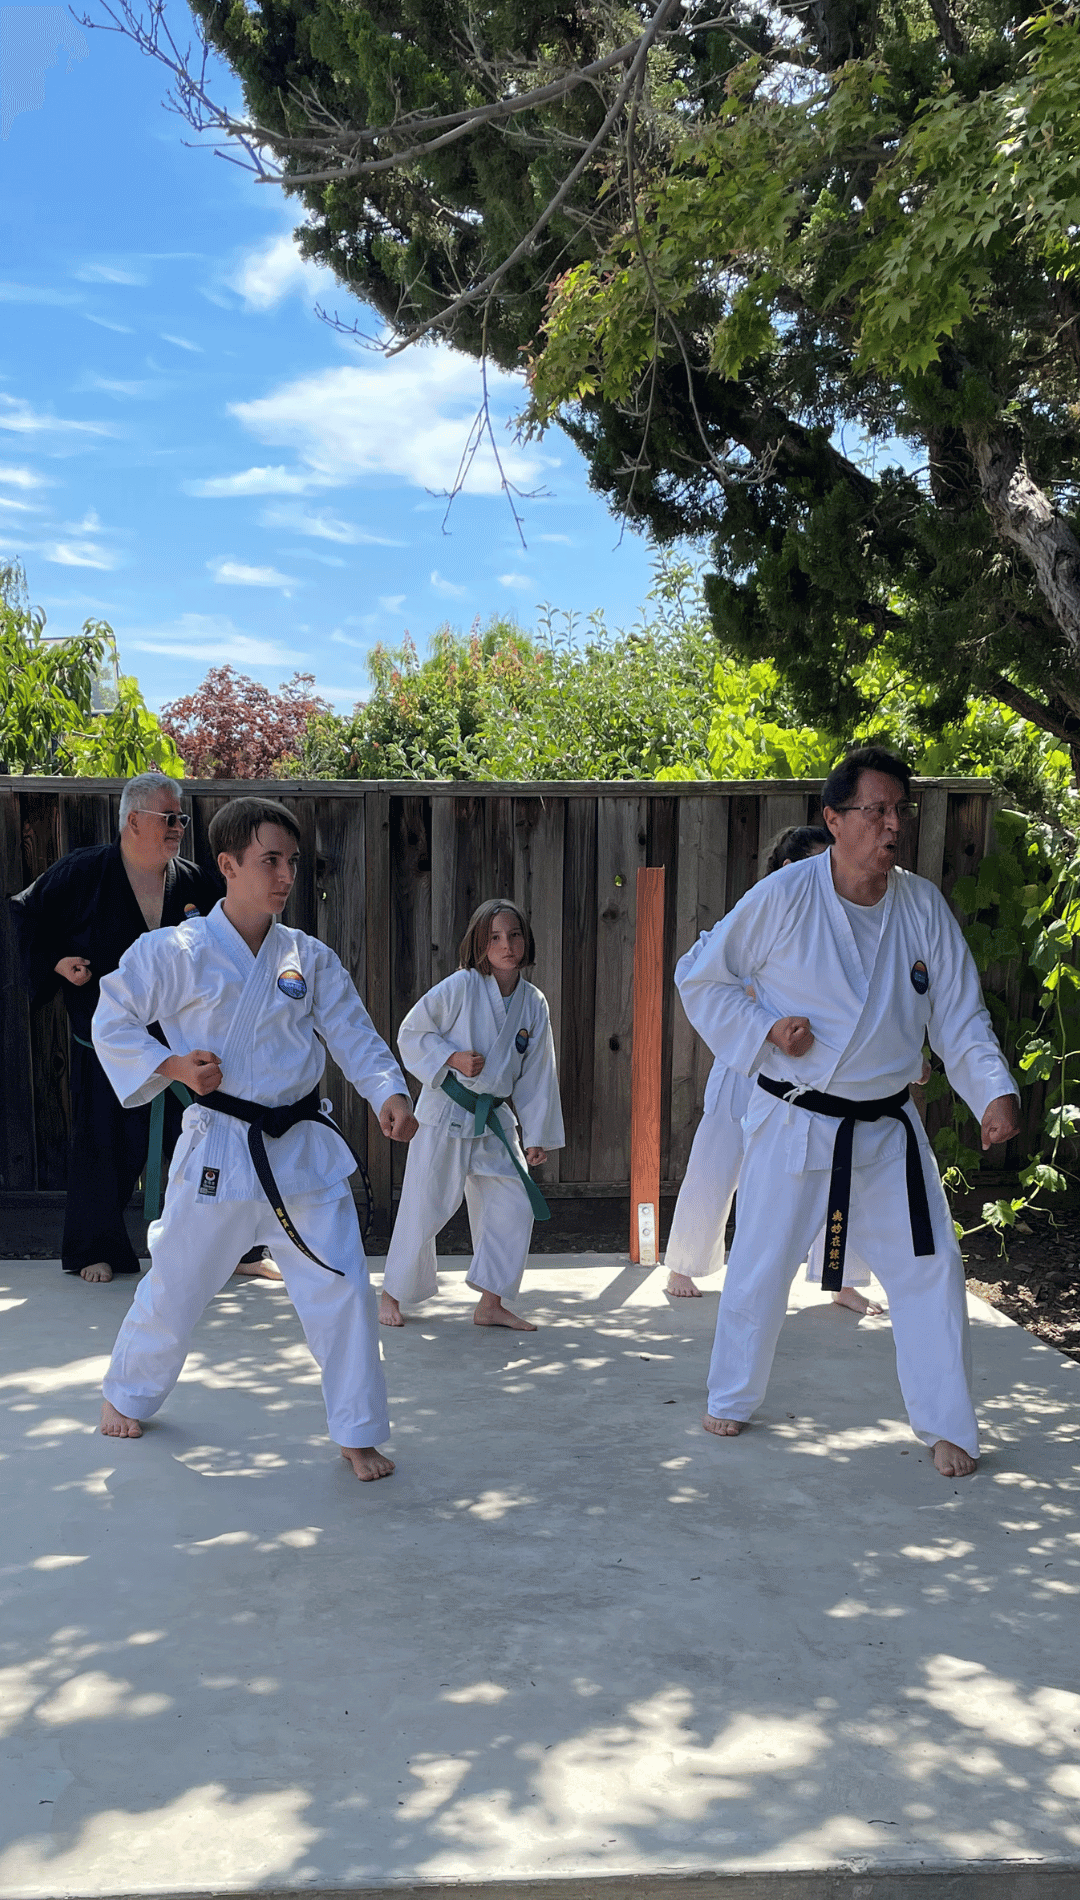 Castro Valley Mountain Karate students train outdoors.